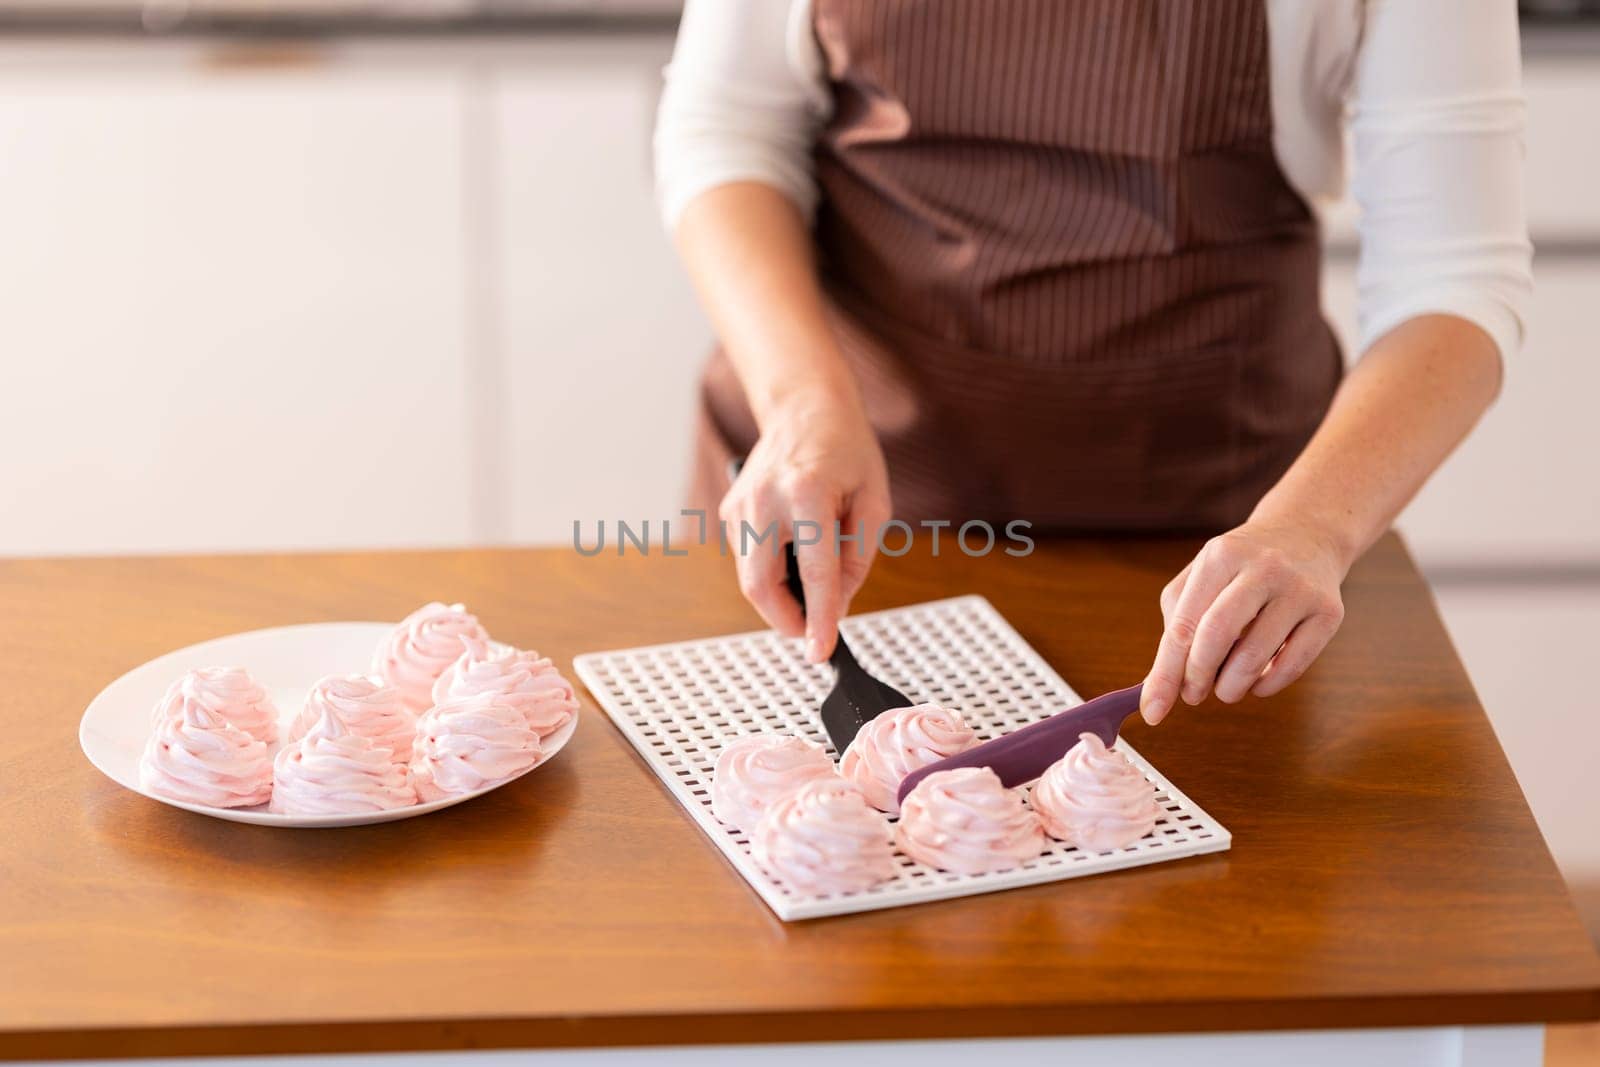 A woman is cutting a tray of pink pastries on a wooden table. The pastries are arranged in a grid pattern on the tray